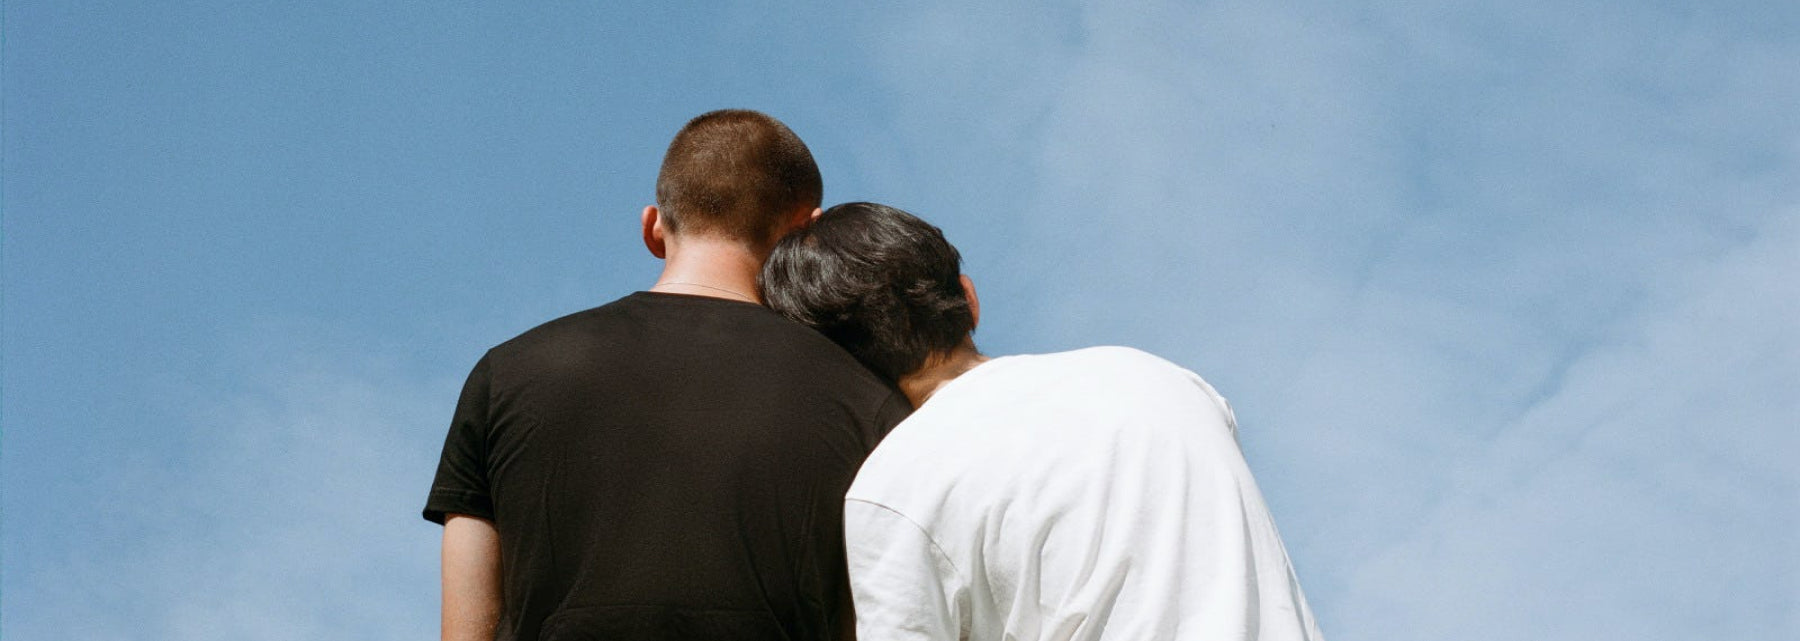 Two people lean against each other in front of a blue sky